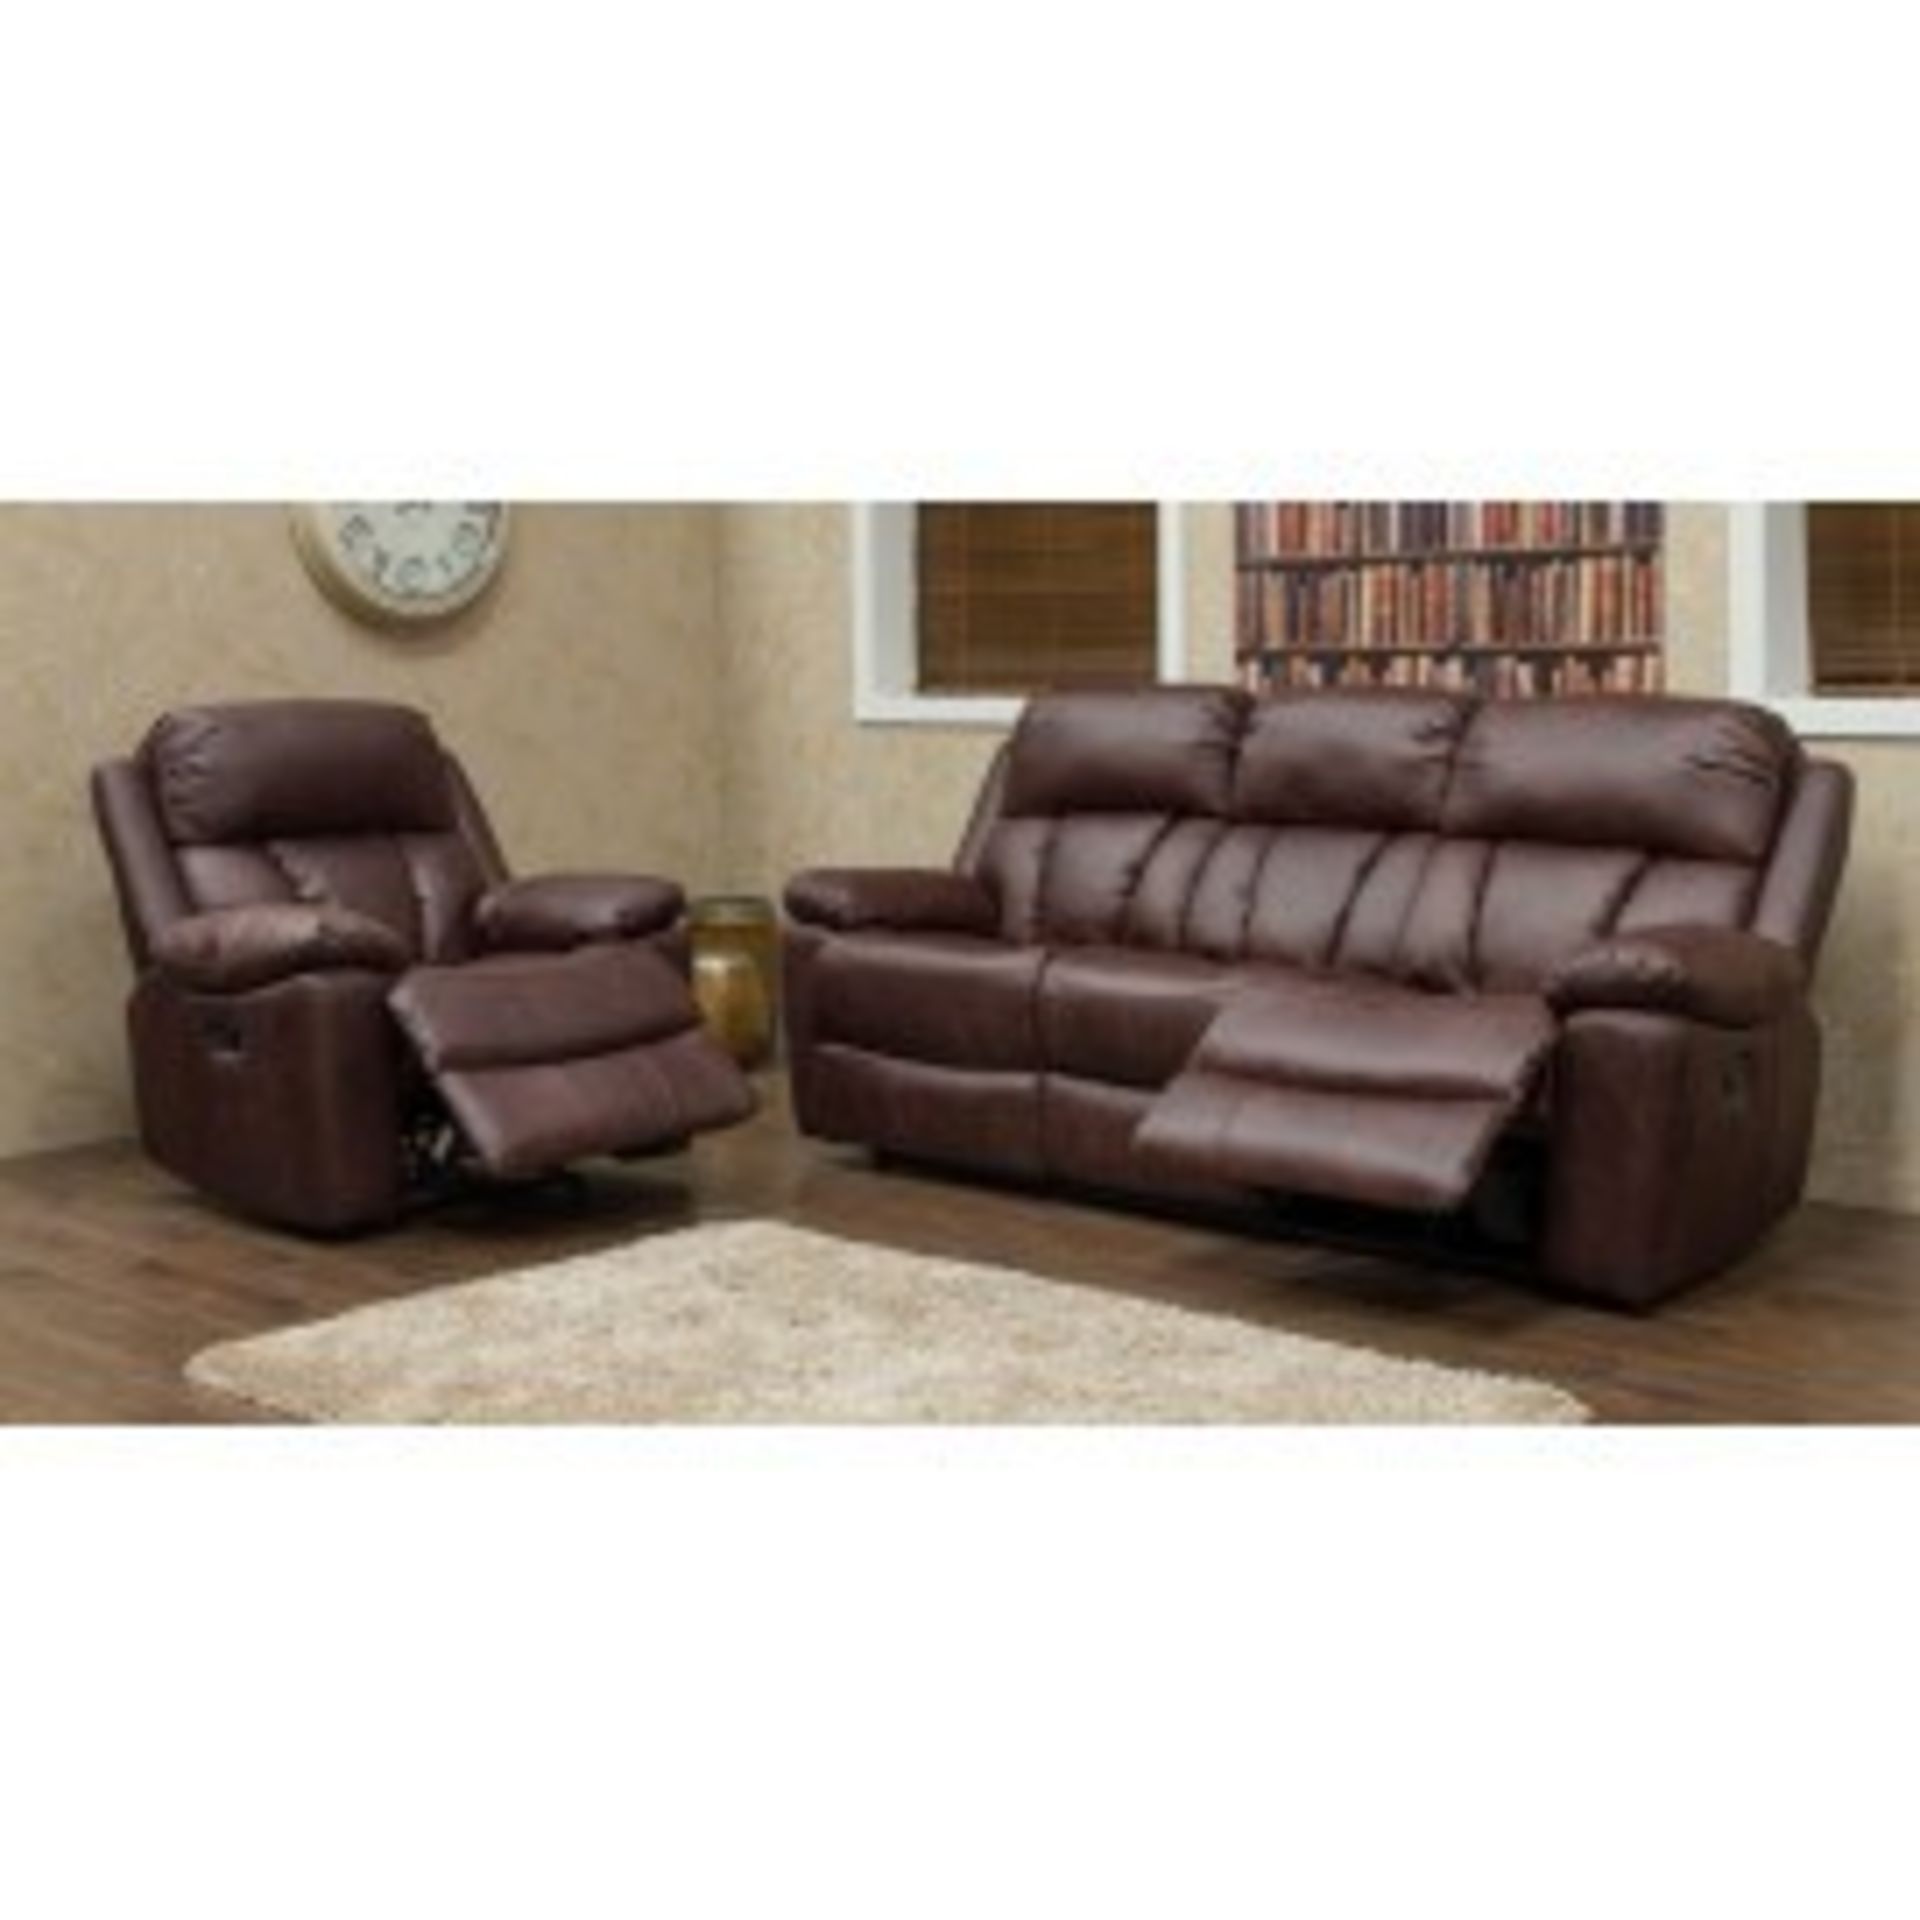 Brand New Boxed Benson 3 Seater Brown Leatheraire Reclining Sofa Plus 2 Matching Arm Chairs